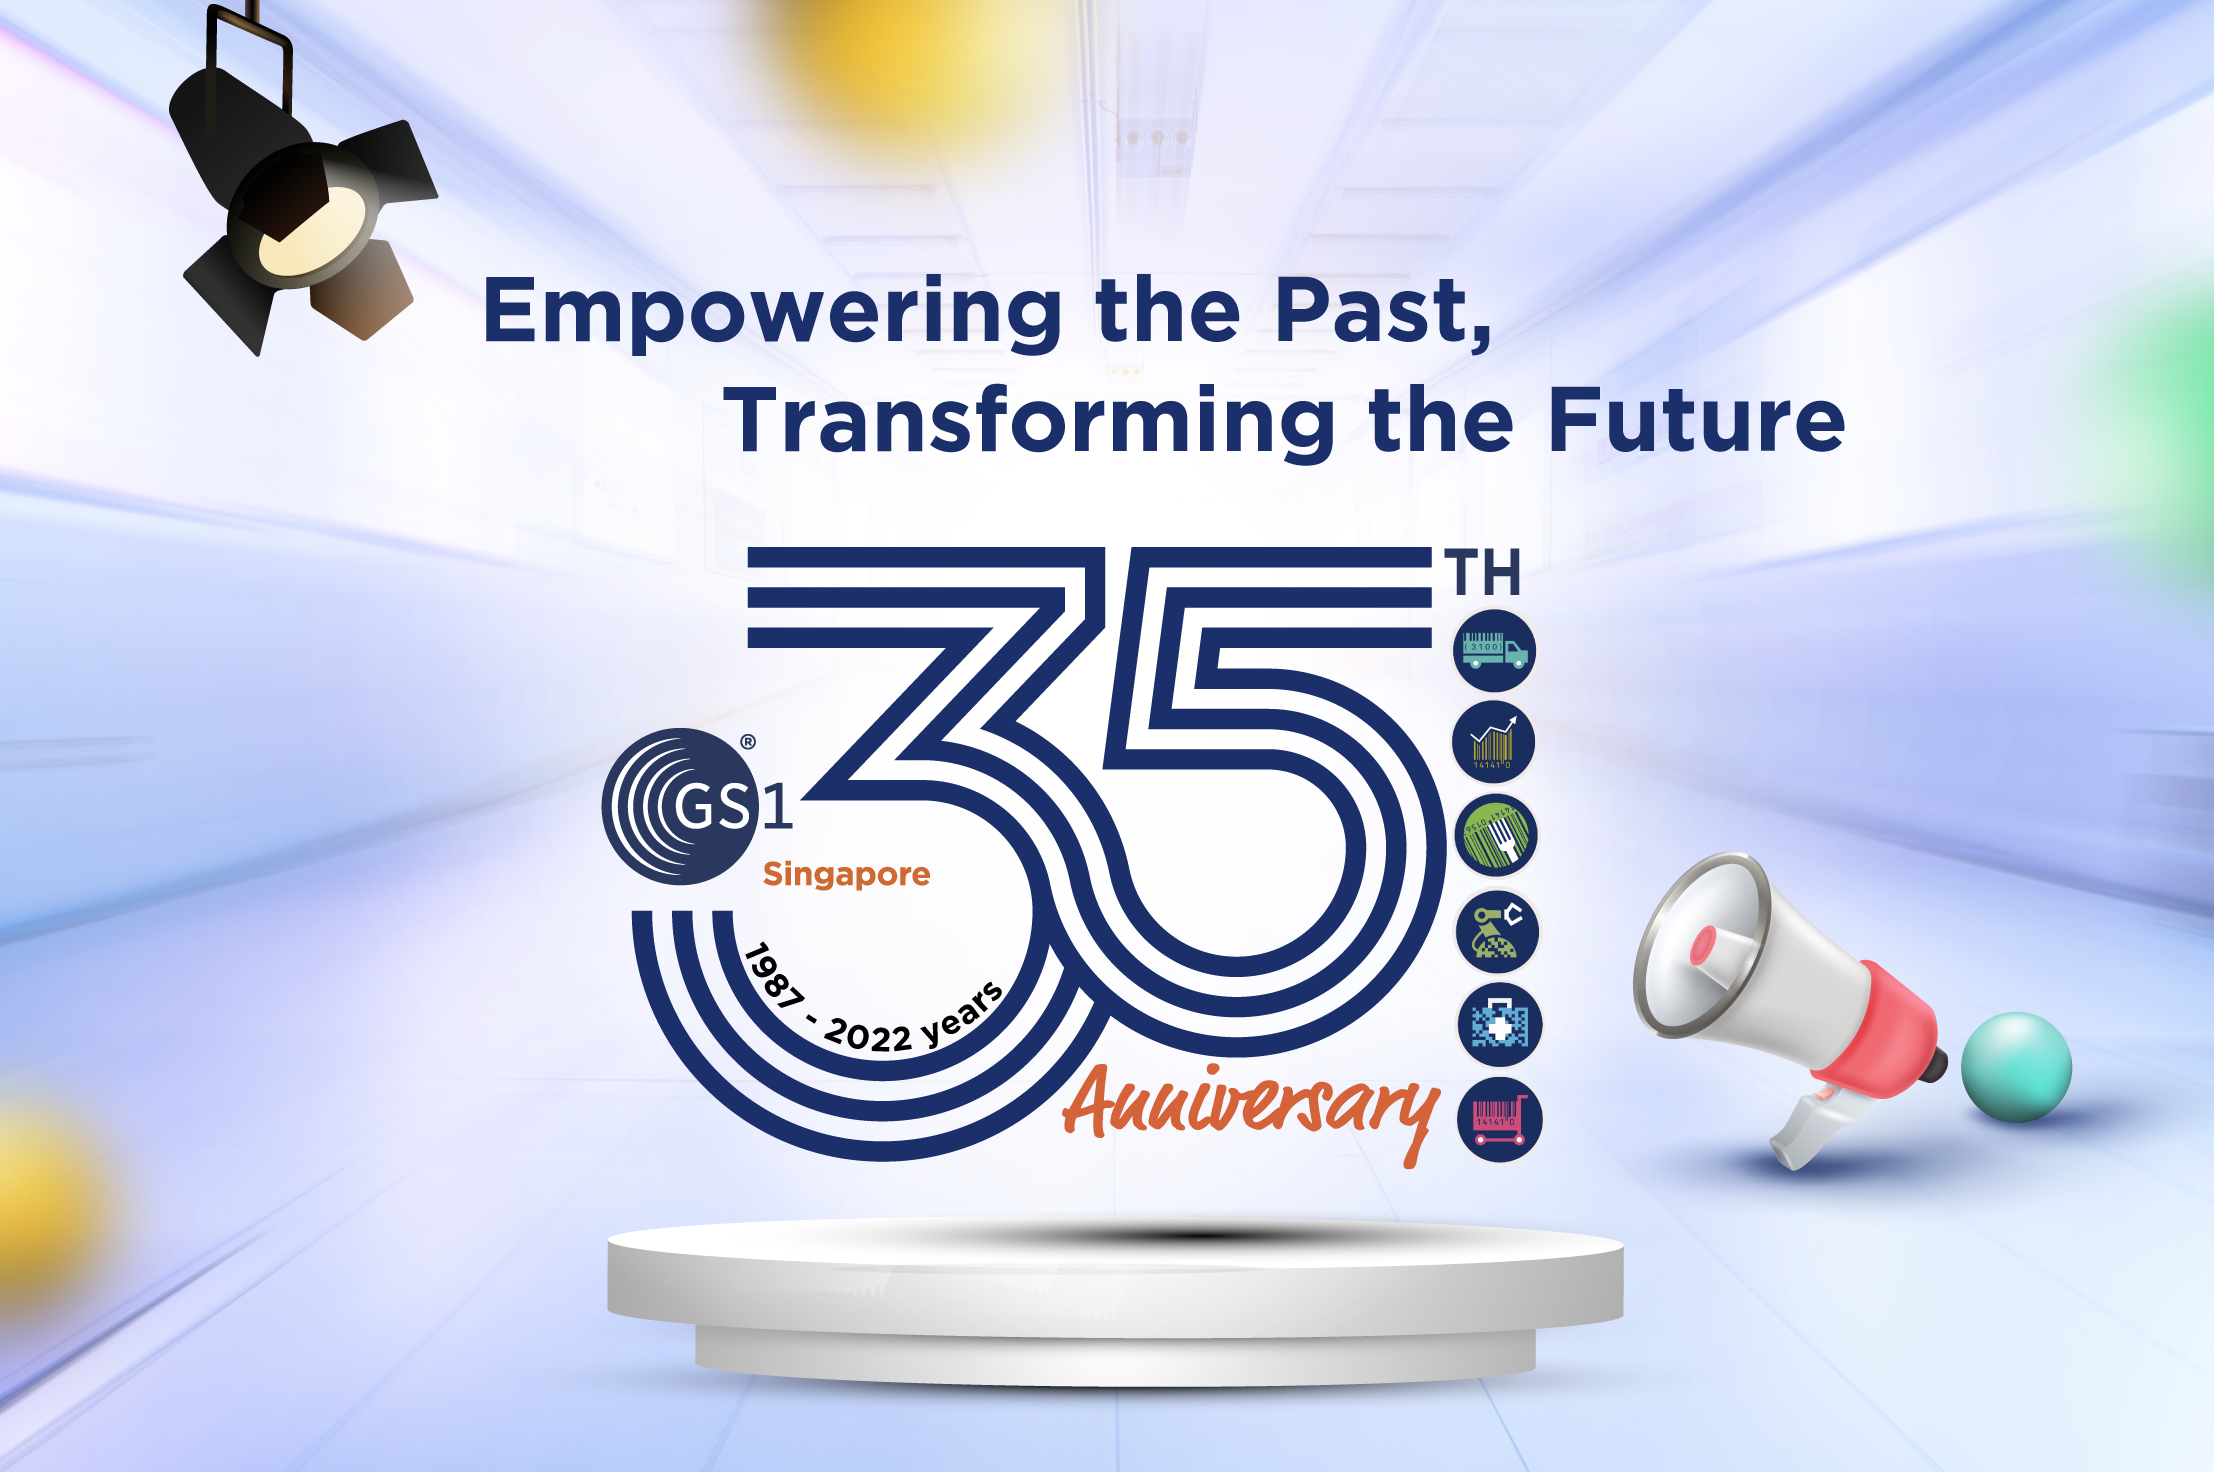 35 years of GS1 Singapore